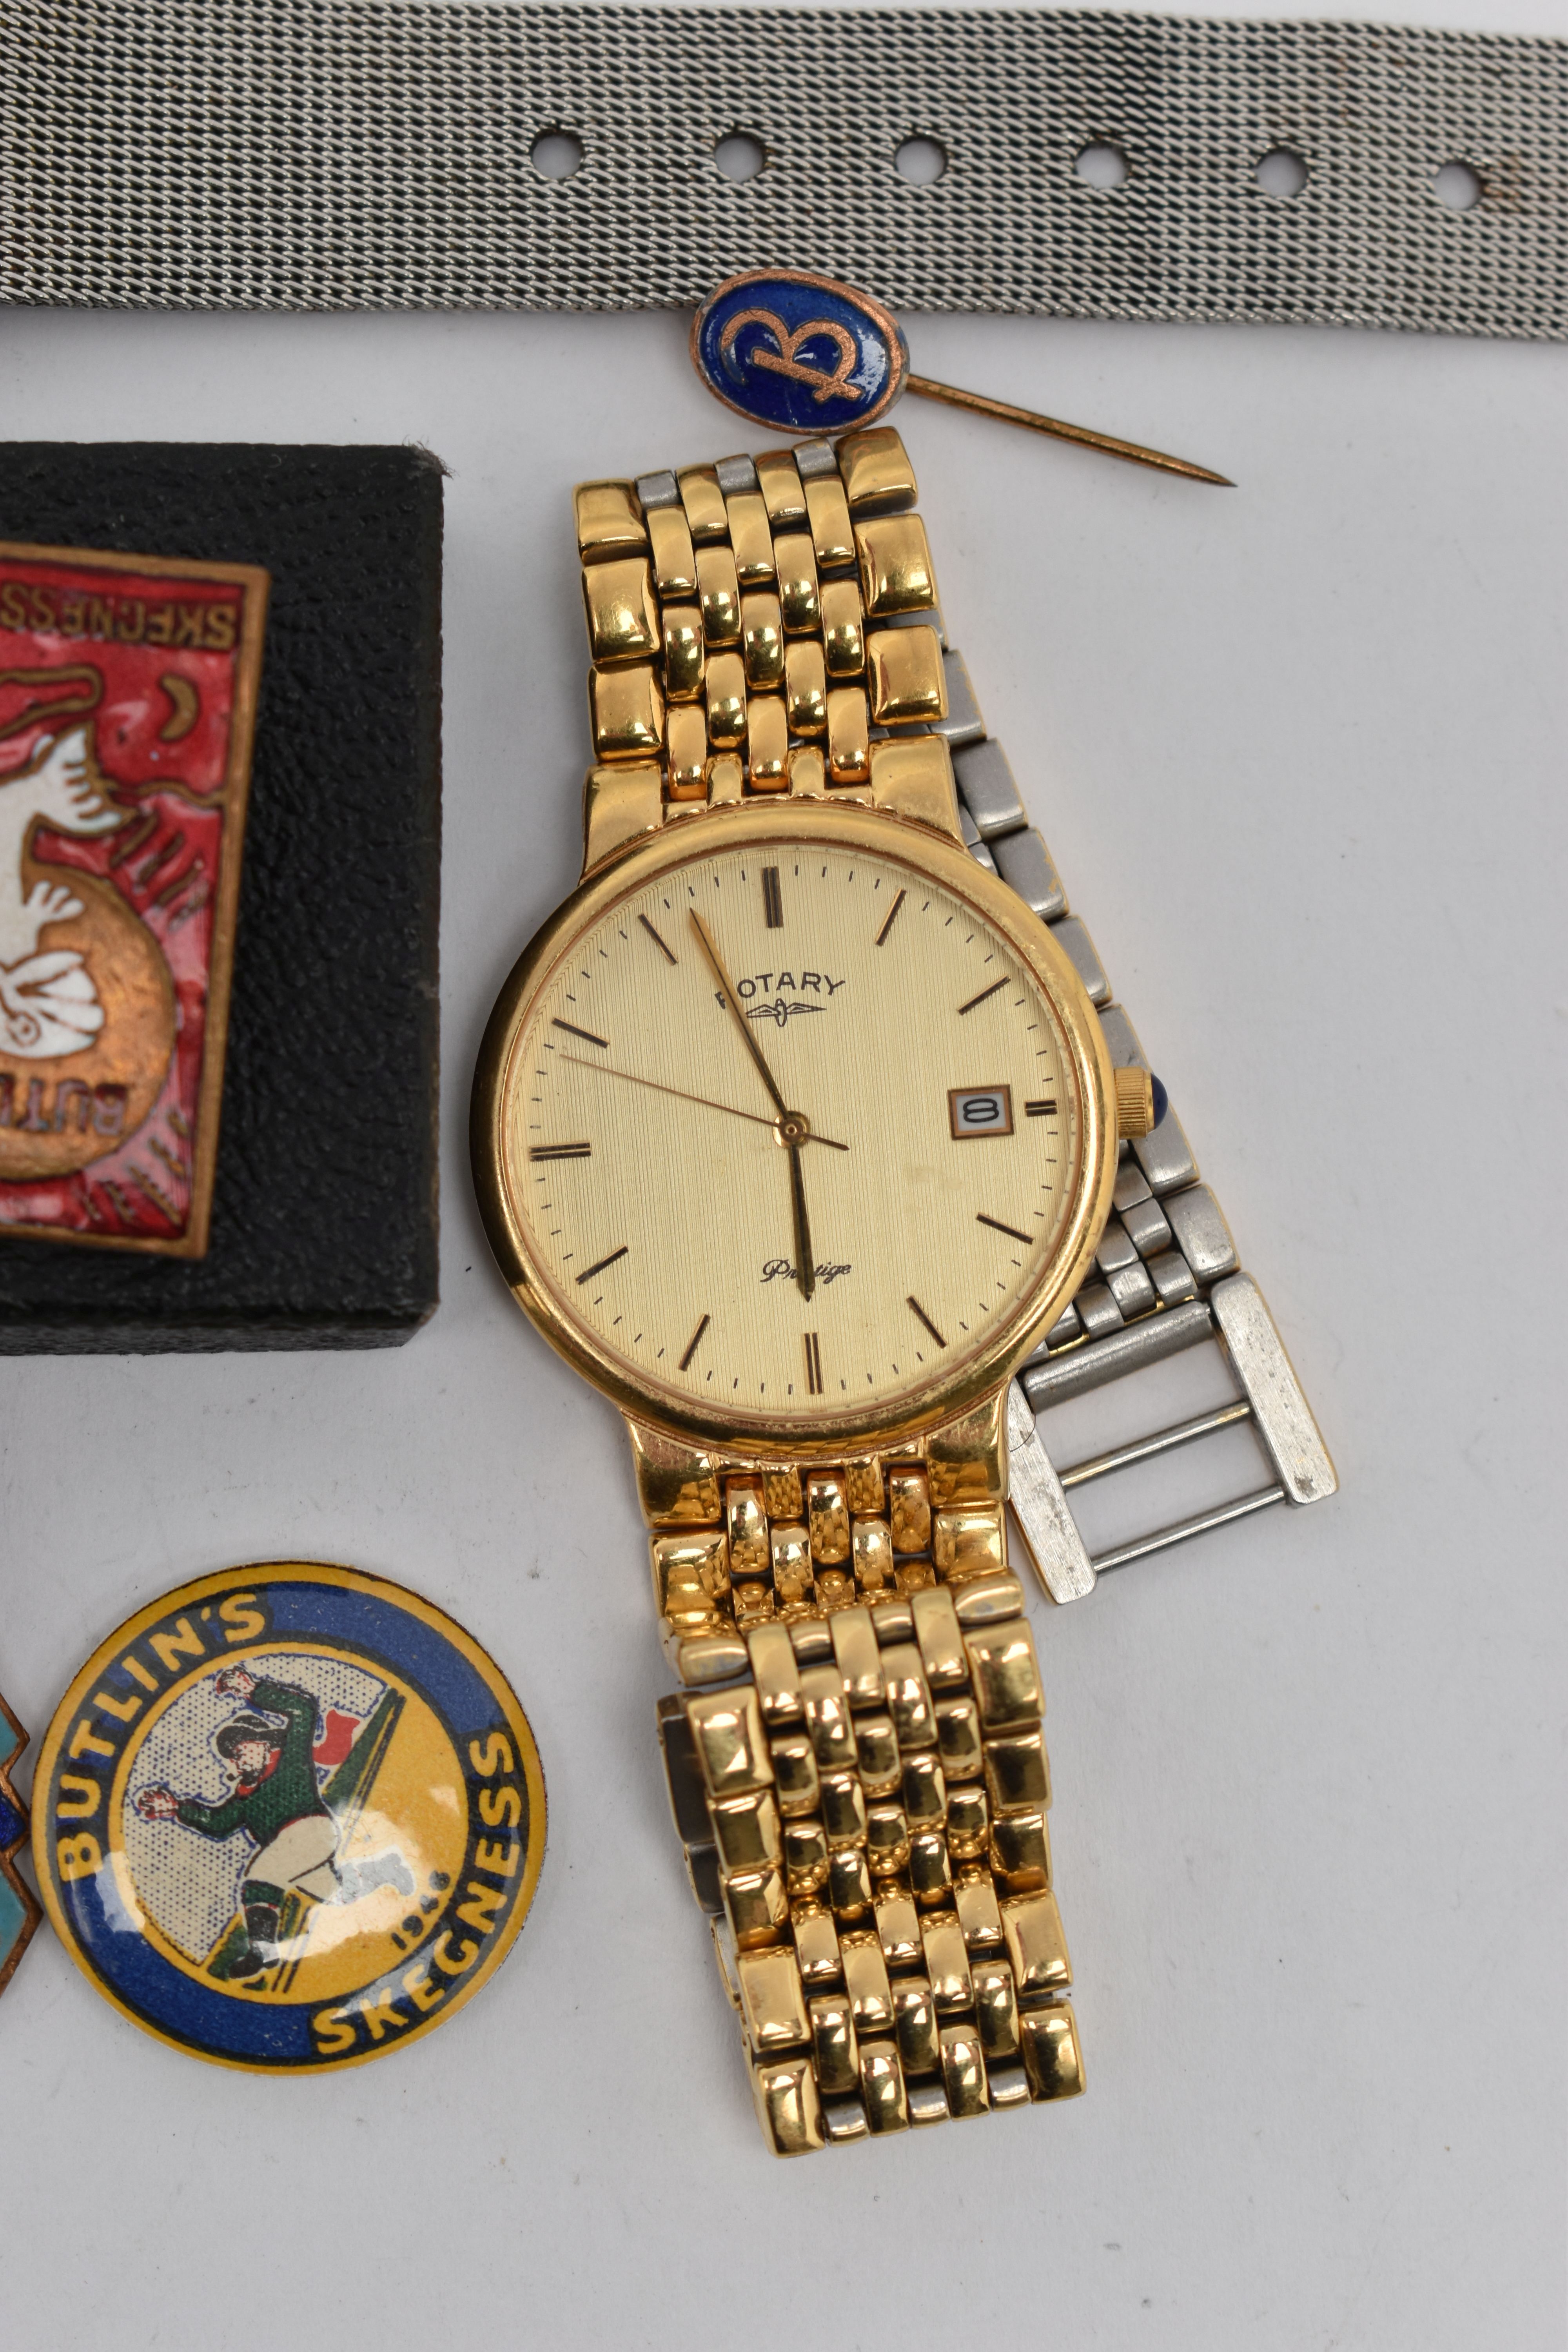 A COLLECTION OF 'BUTLINS' PINS AND ASSORTED WATCHES, eight Butlins pins and badges, dated between - Image 4 of 5